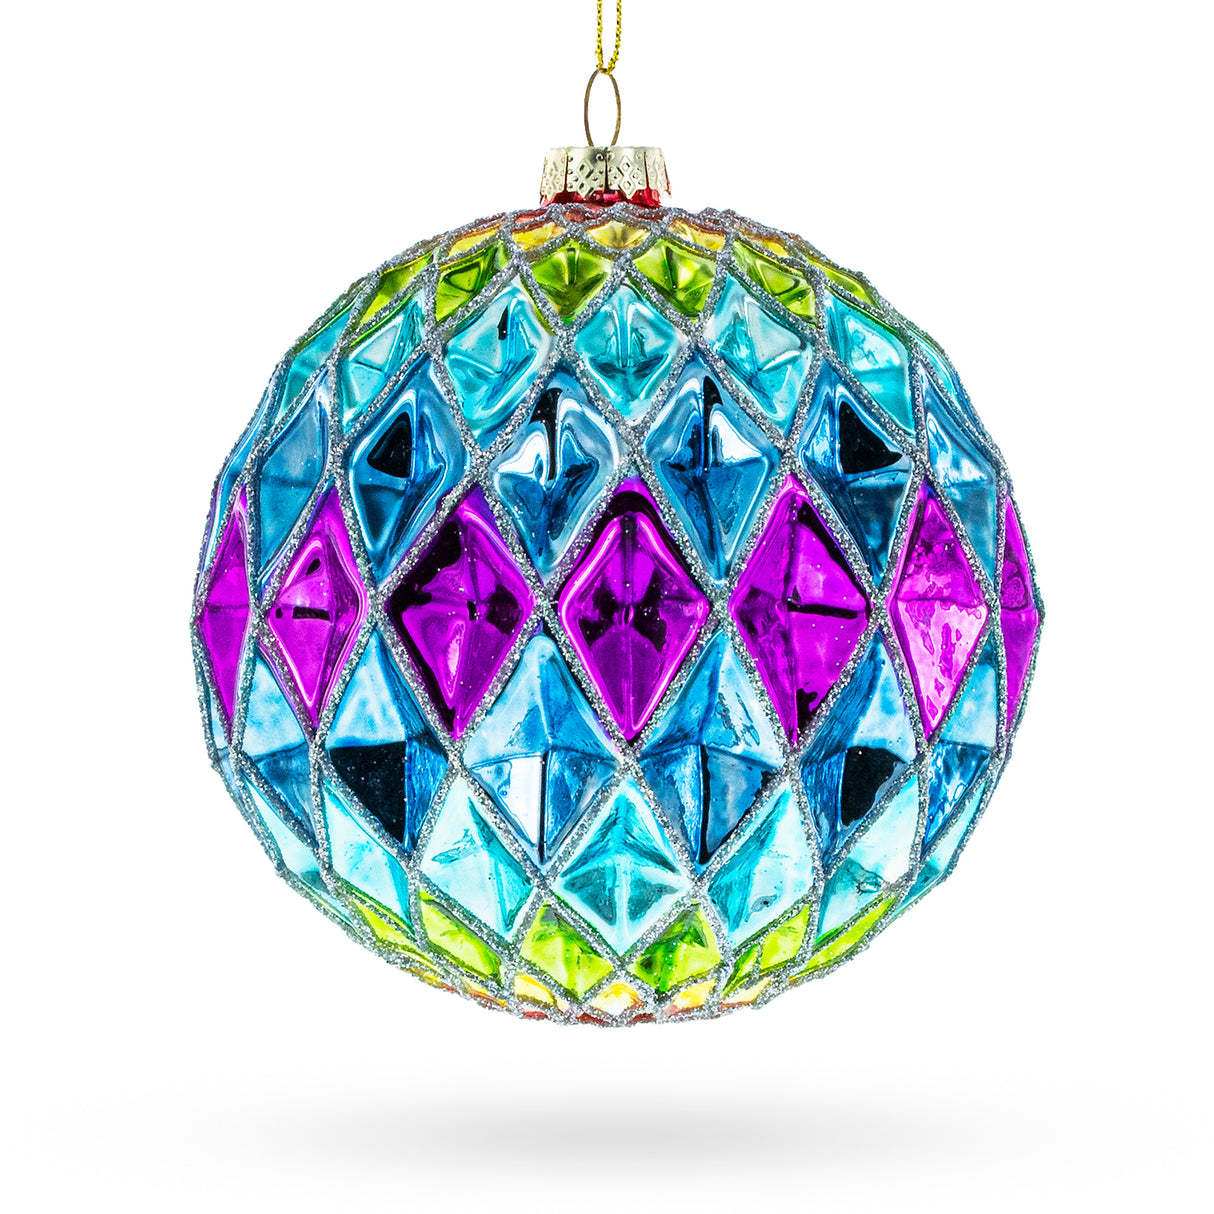 Vibrantly Colored - Radiant Blown Glass Christmas Ornament in Blue color, Round shape